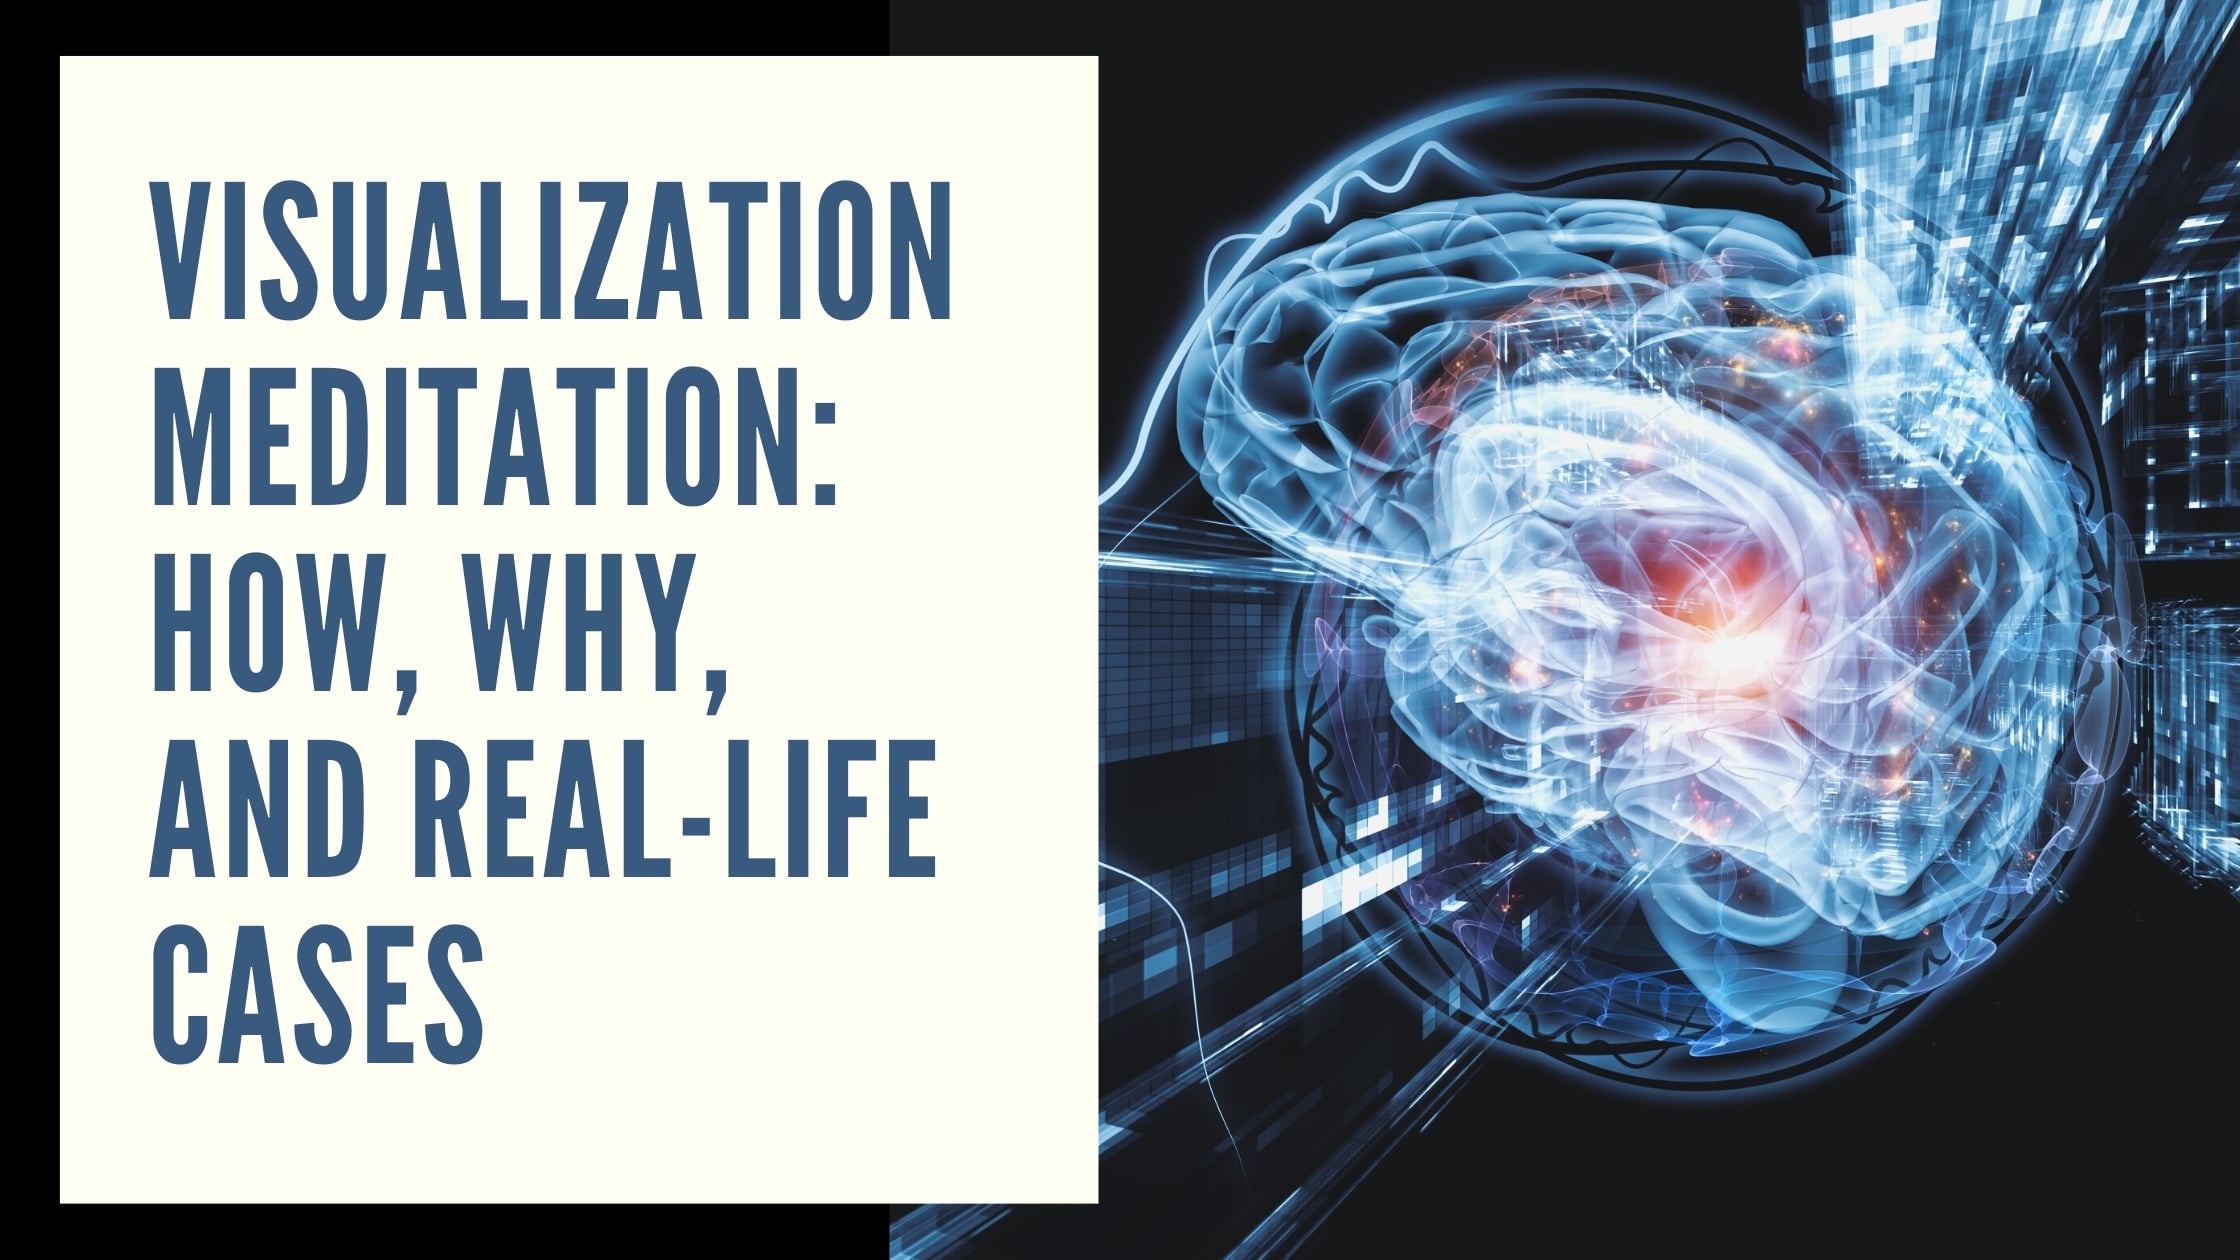 Visualization Meditation: How, Why, and Real-Life Cases